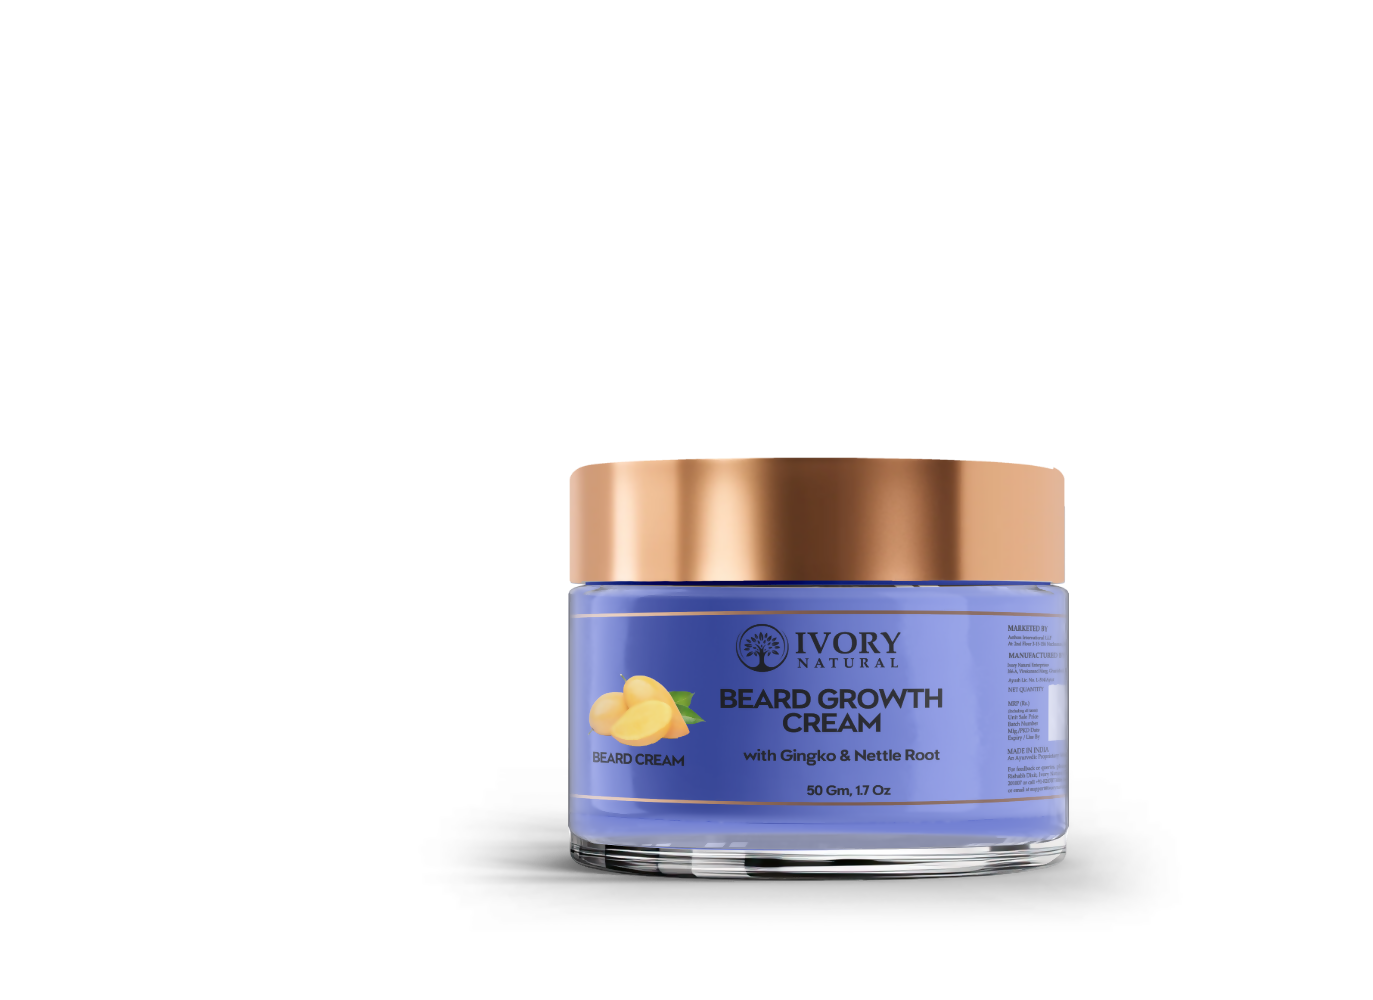 Ivory Natural Beard Growth Cream - Biotin Boosted Hair Follicle For New Hair Cycle